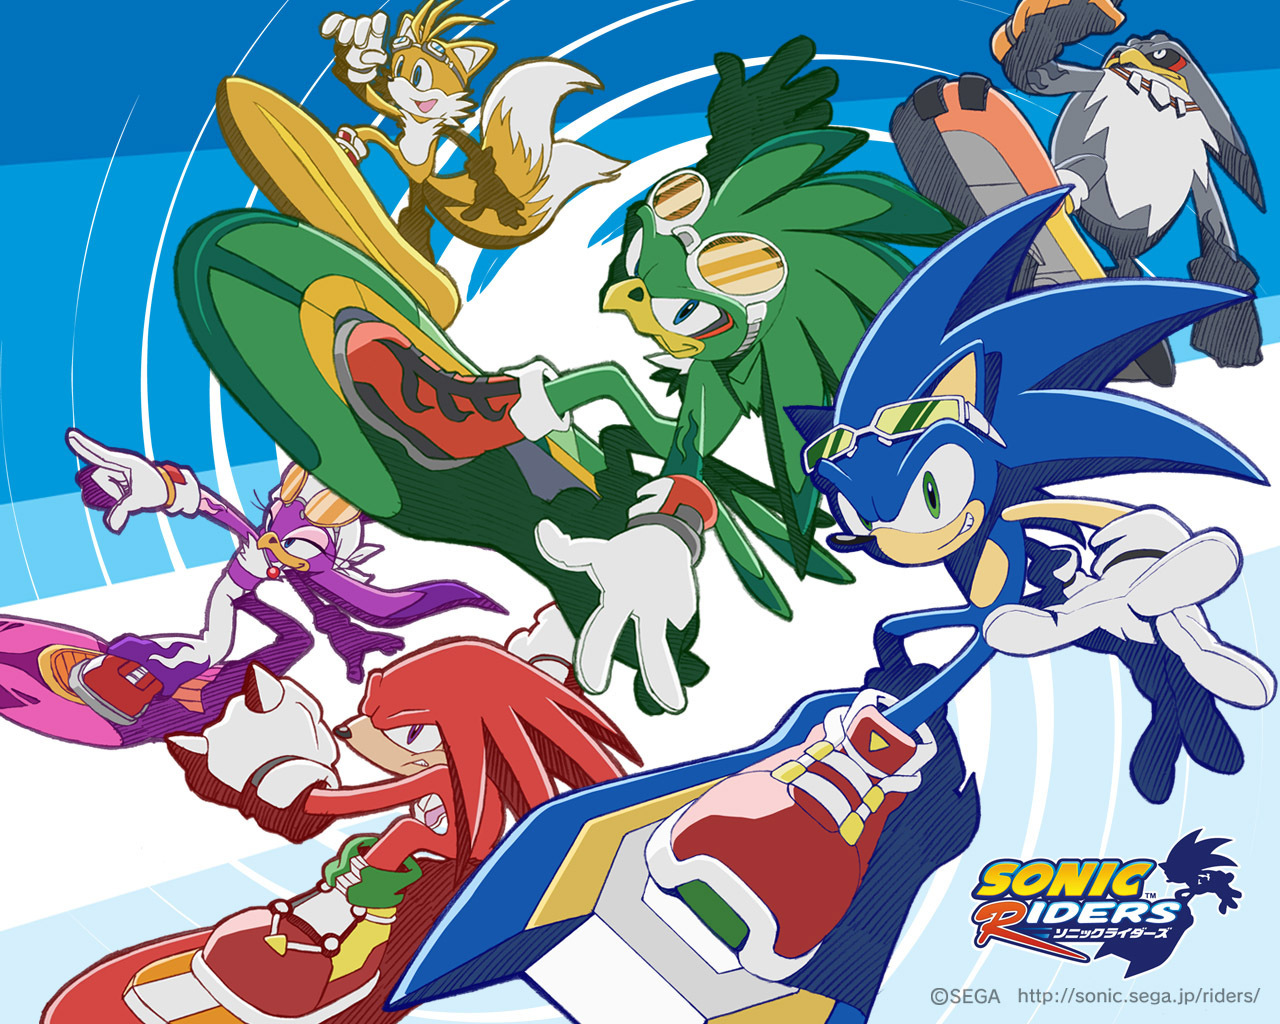 Sonic Characters Riders HD Wallpaper